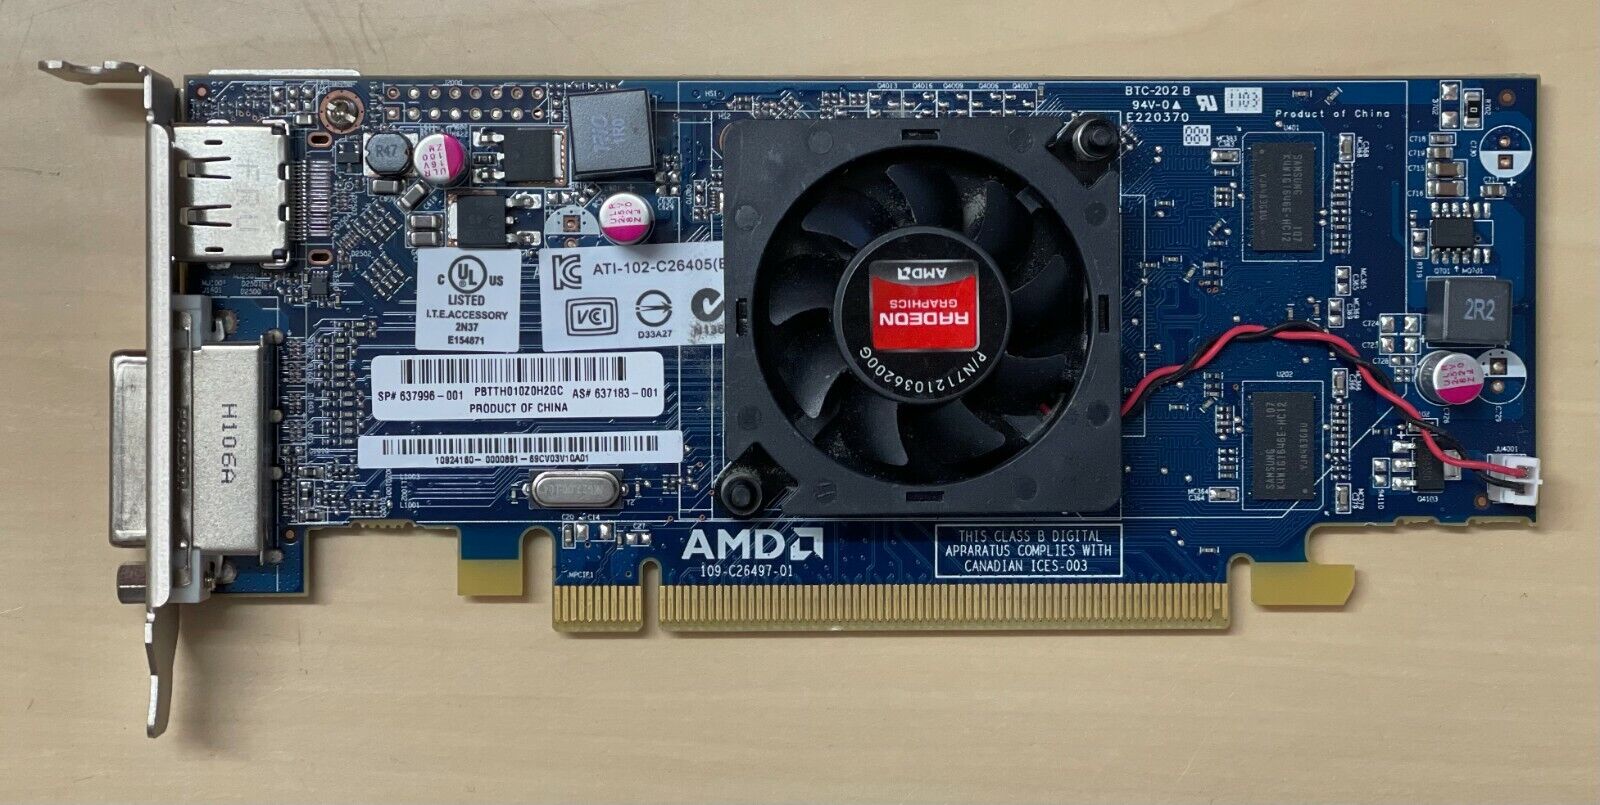 Used HP AMD Radeon HD6450 512 MB Graphic Cards 637183-001 (129)